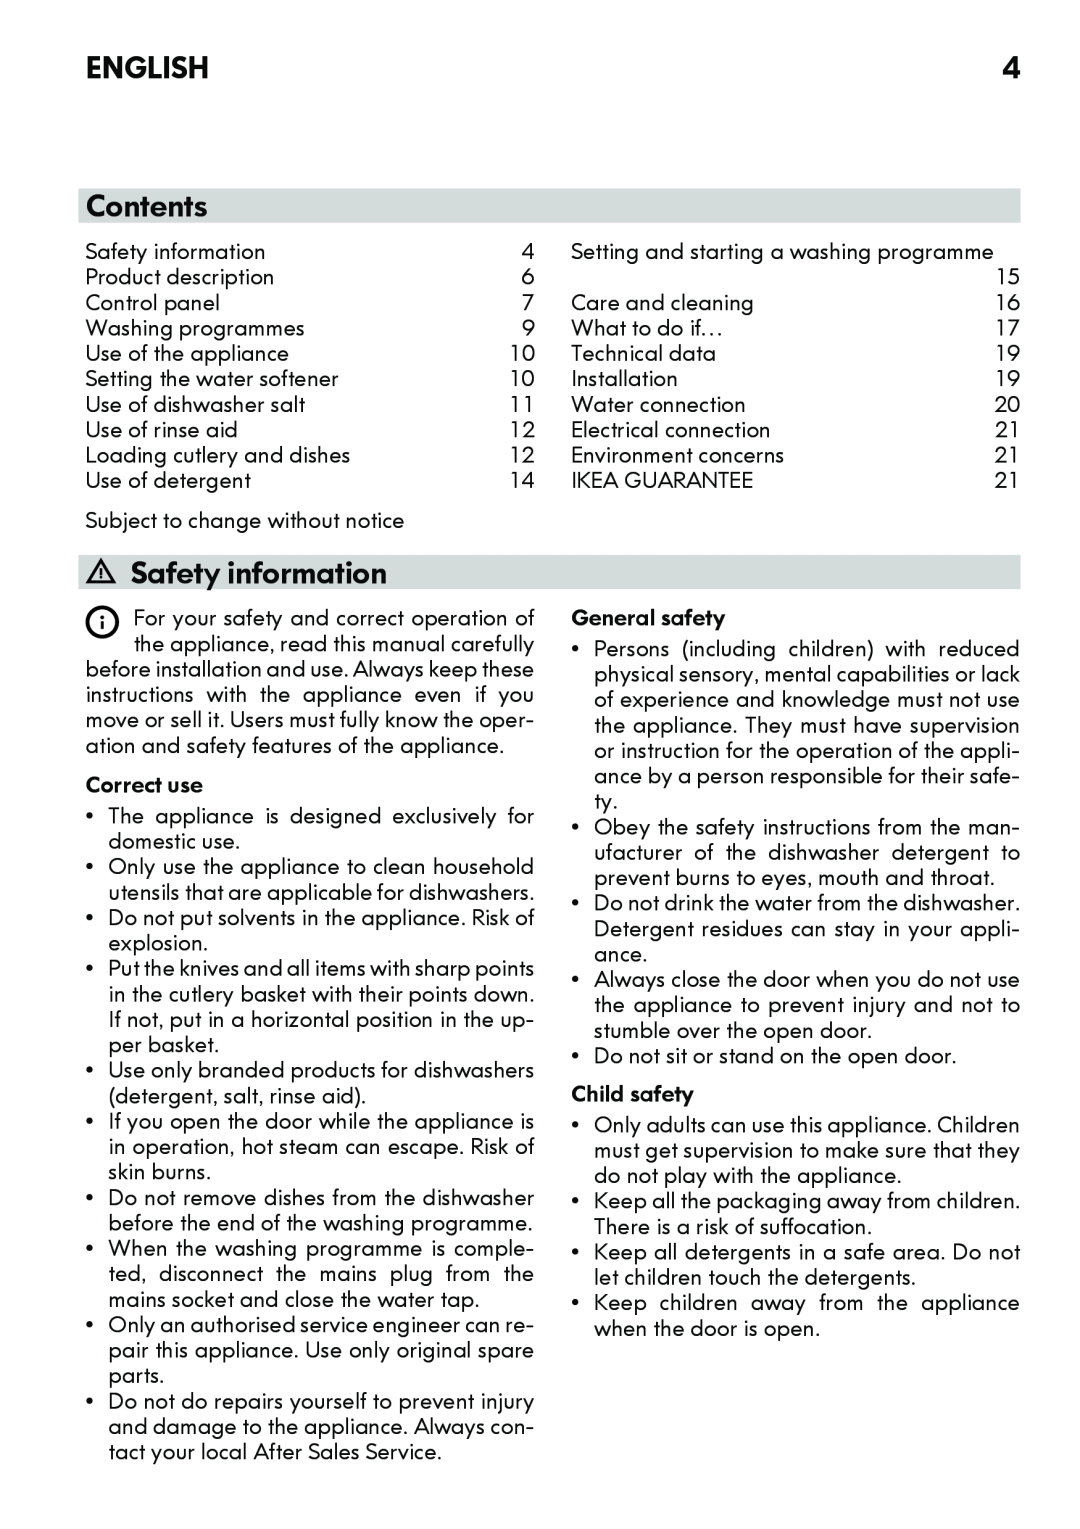 IKEA DW60 manual English, Contents, Safety information 